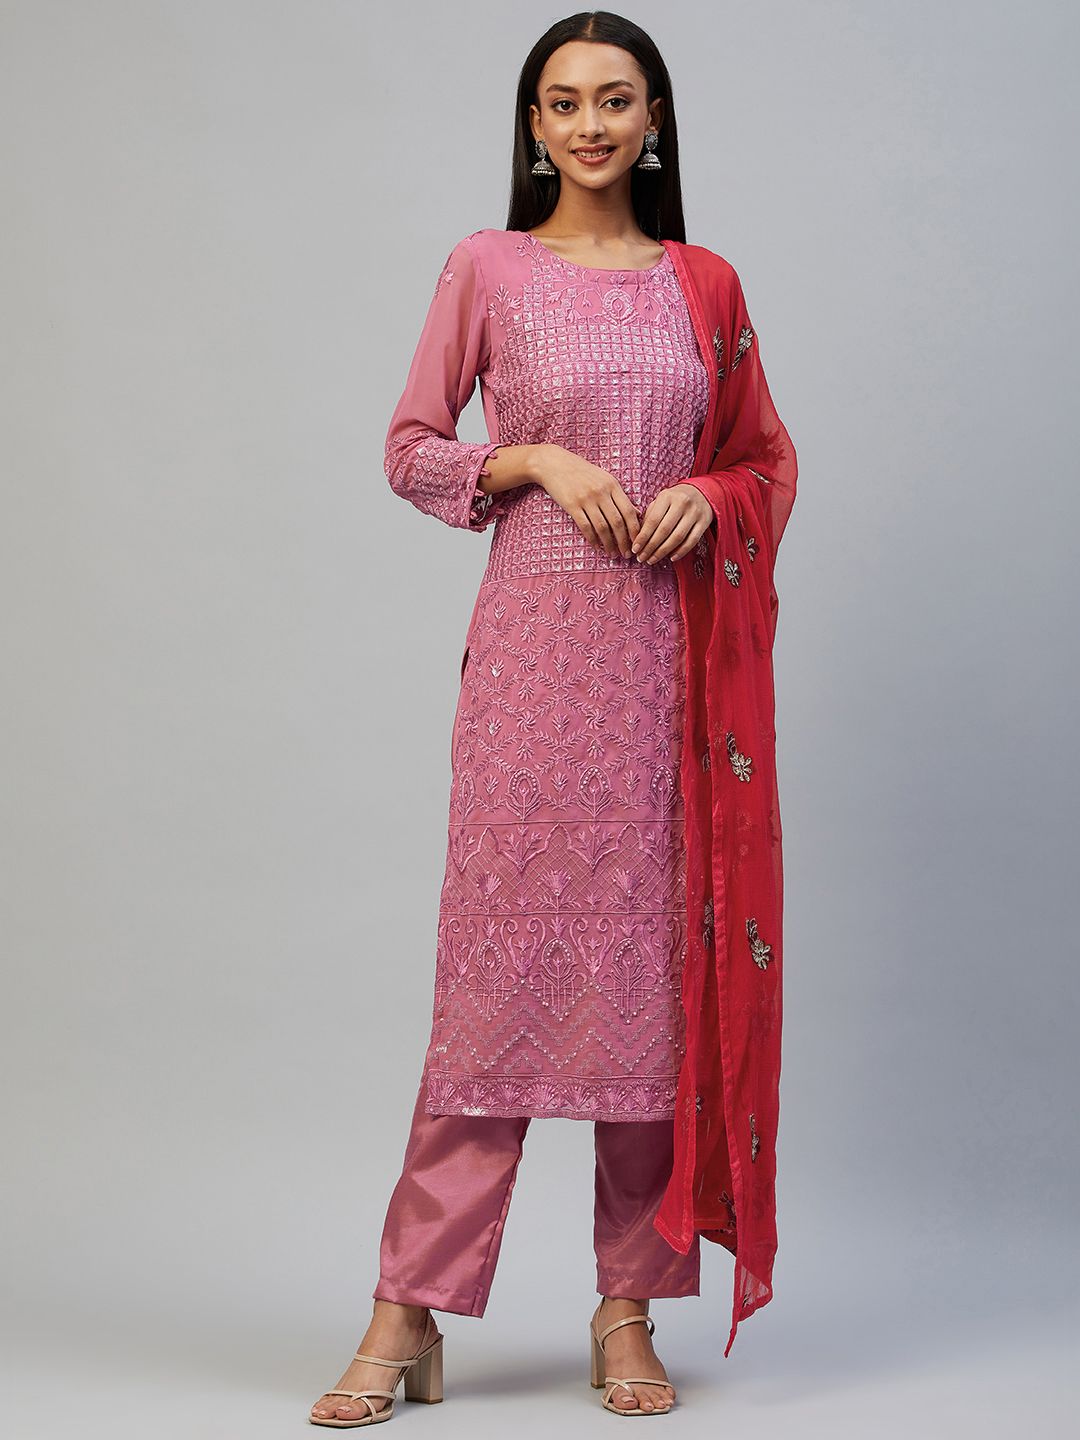 Readiprint Fashions Pink & Red Embroidered Unstitched Dress Material Price in India